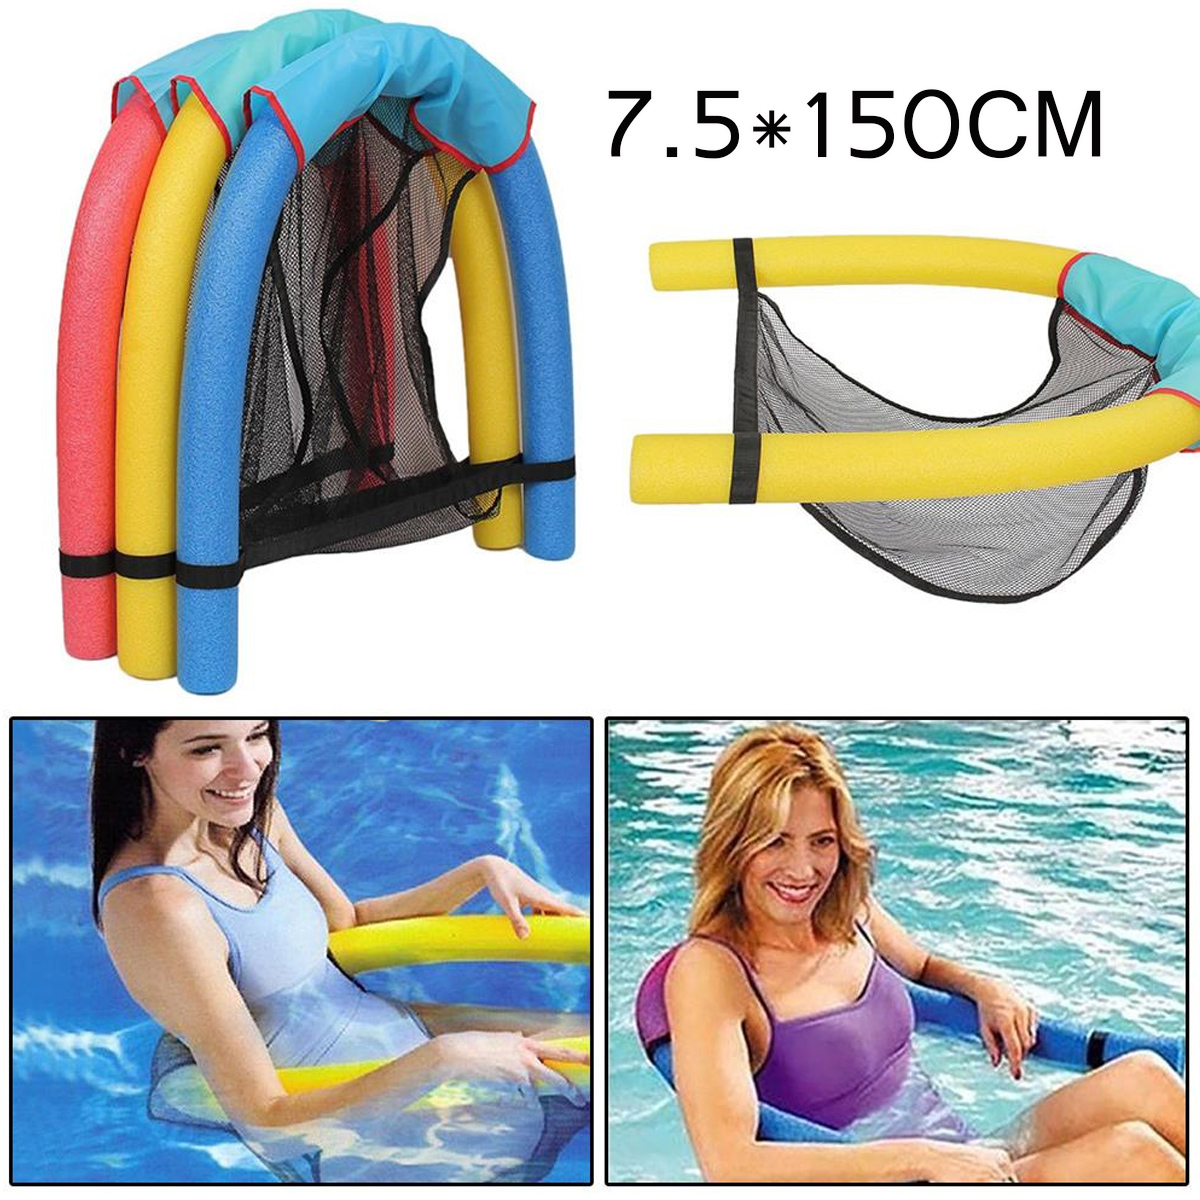 Floating-Pool-Chair-Swimming-Pool-Water-Hammock-Float-Seat-Water-Lounge-Chairs-Travel-Water-Swimming-1723804-1